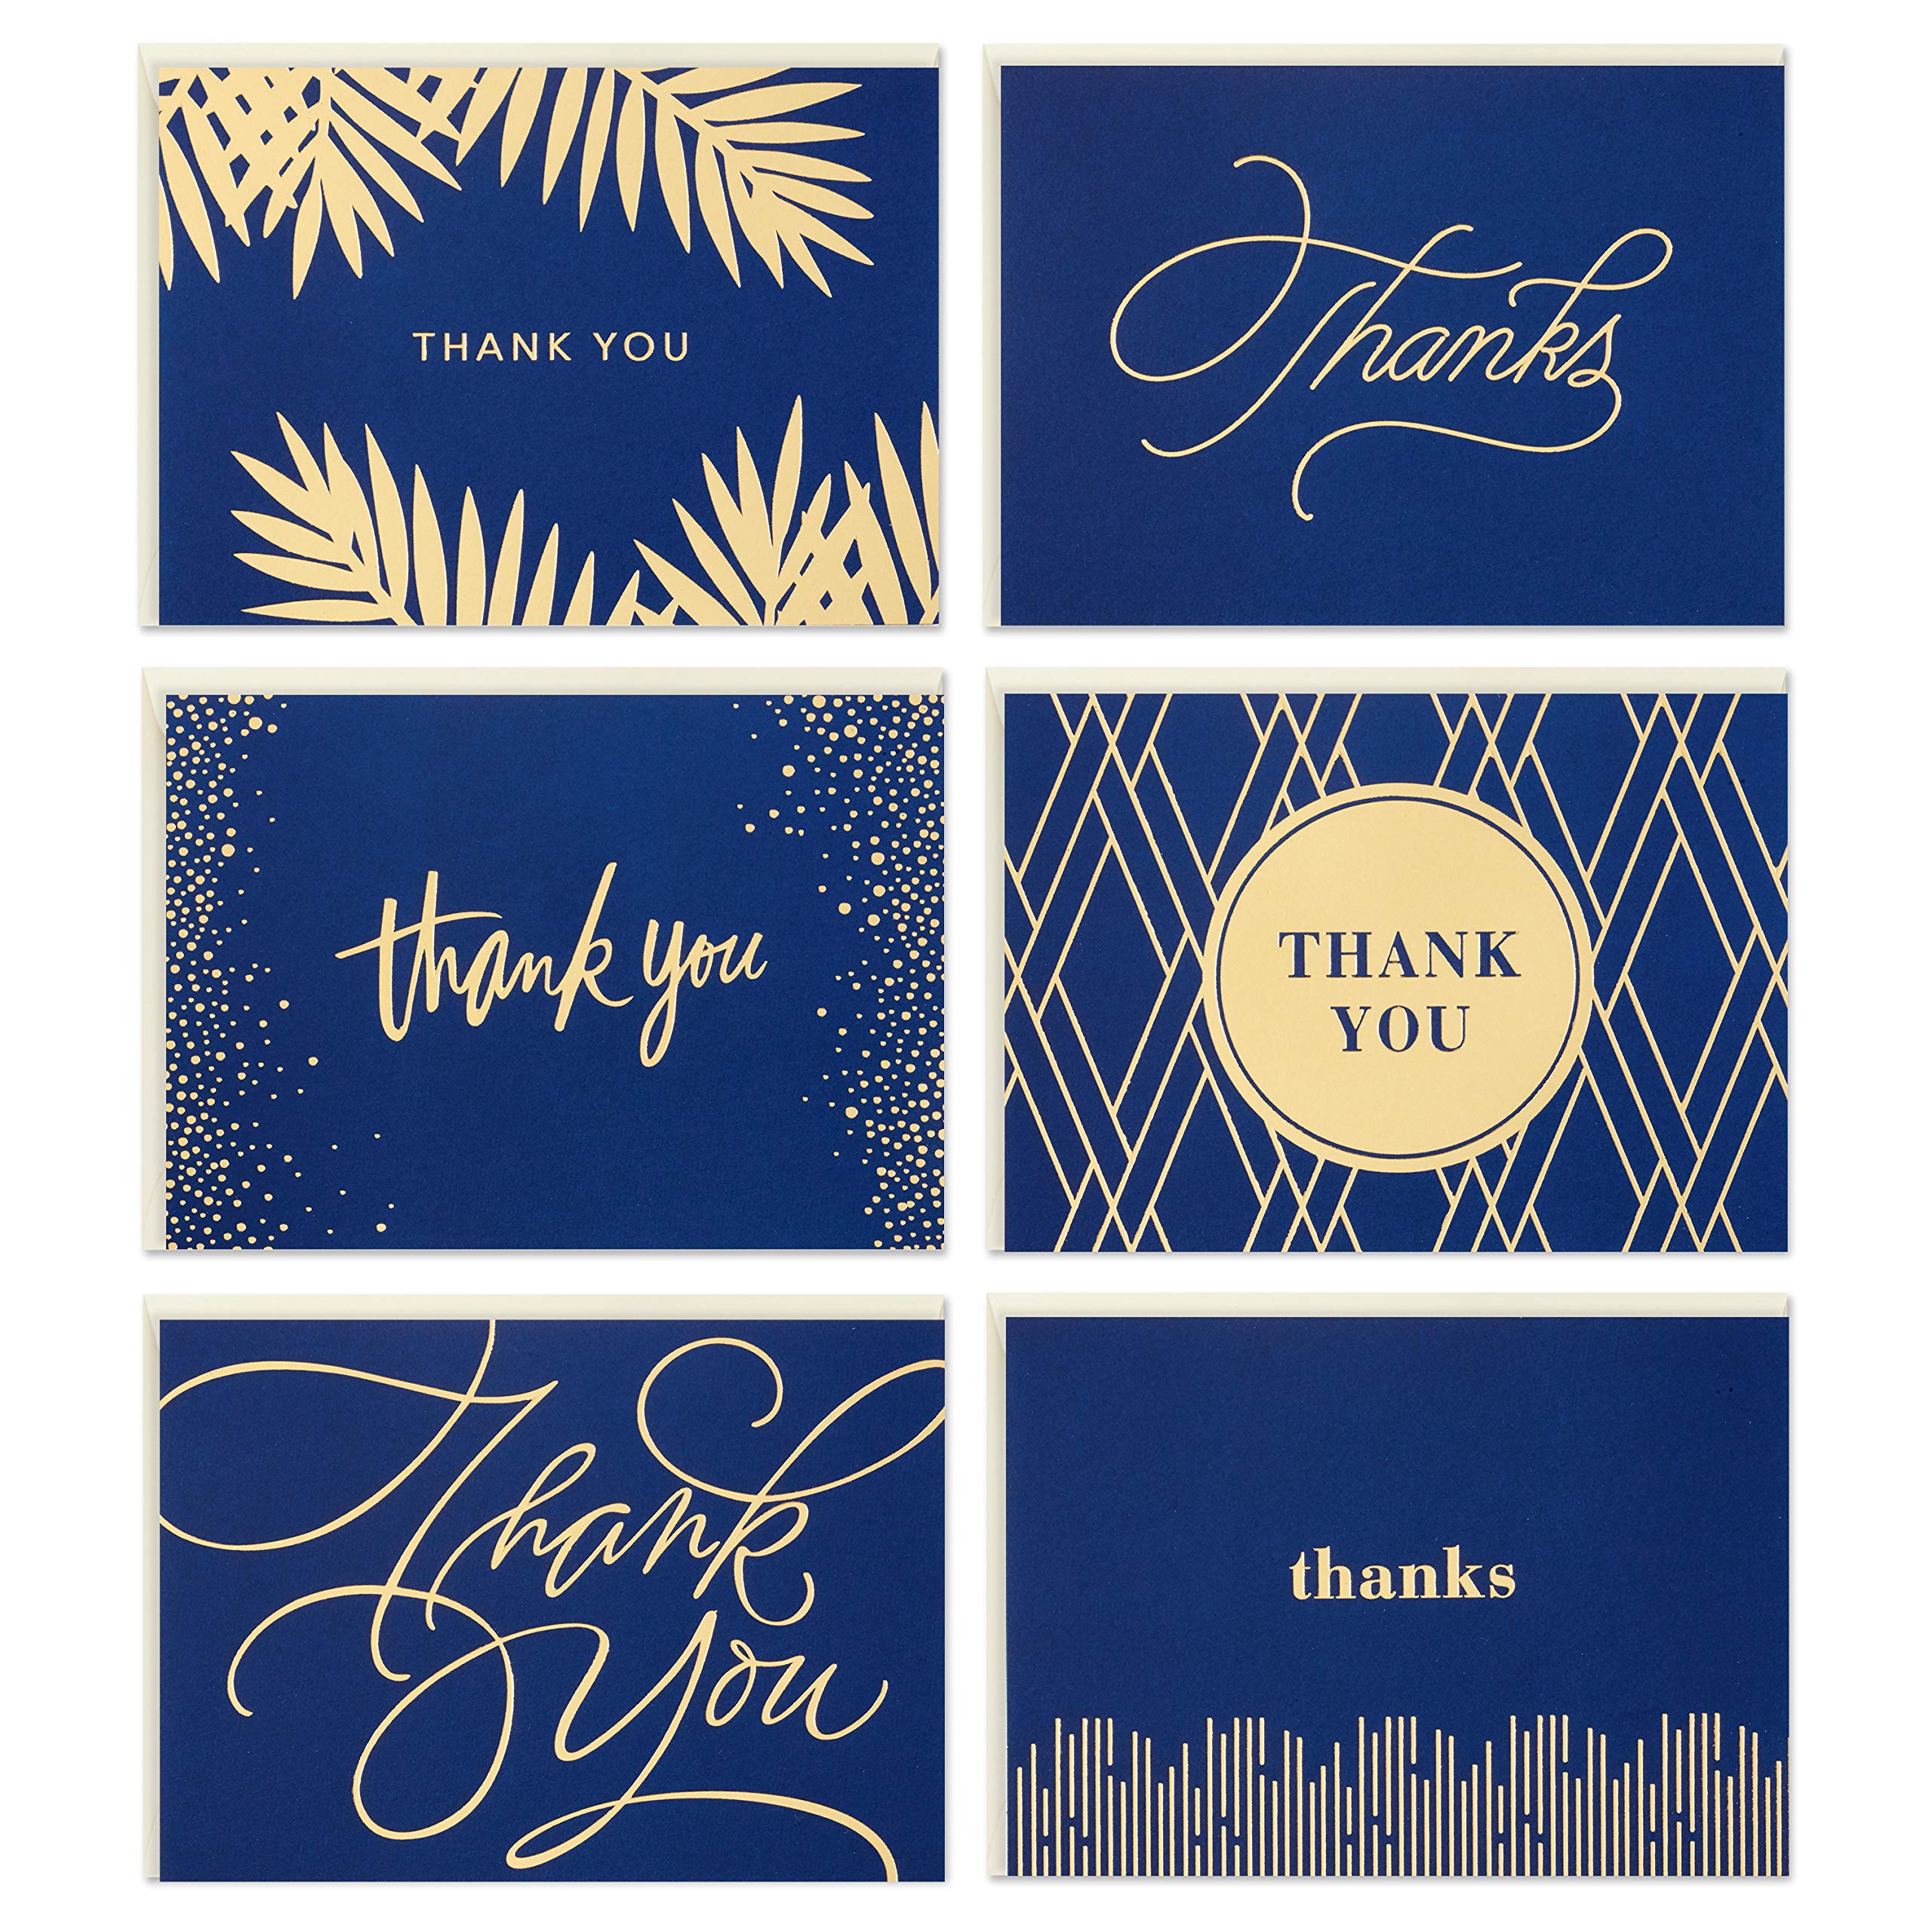 Hallmark Thank You Cards Assortment, Gold and Navy & Thank You Cards (Silver Foil Script, 40 Thank You Notes and Envelopes)